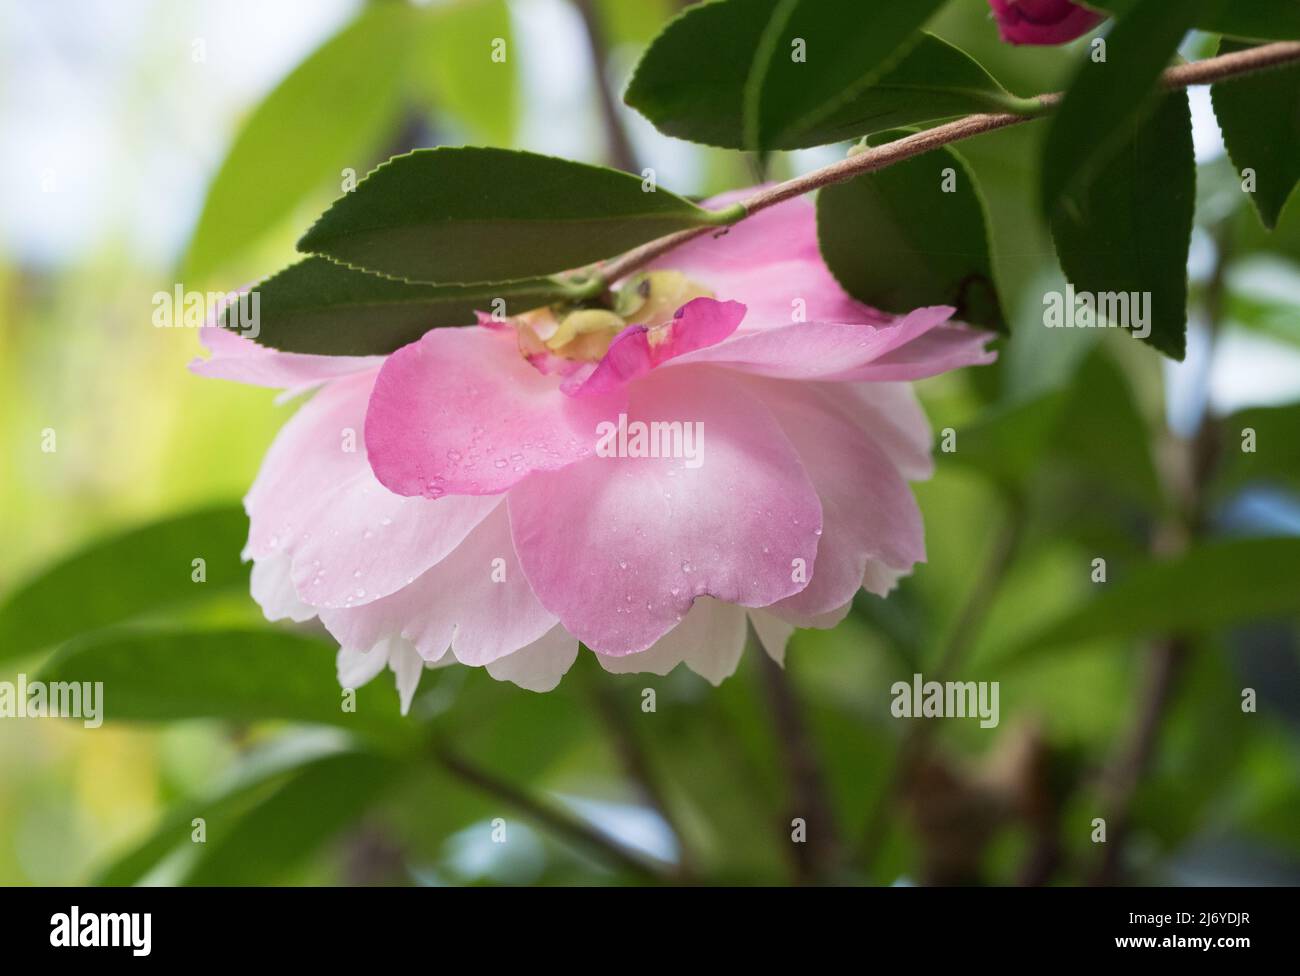 Flowers in the garden, pink Camellia sasanqua flower, beautiful in the rain, fresh, wet with water drops on delicate petals and green leaves Stock Photo